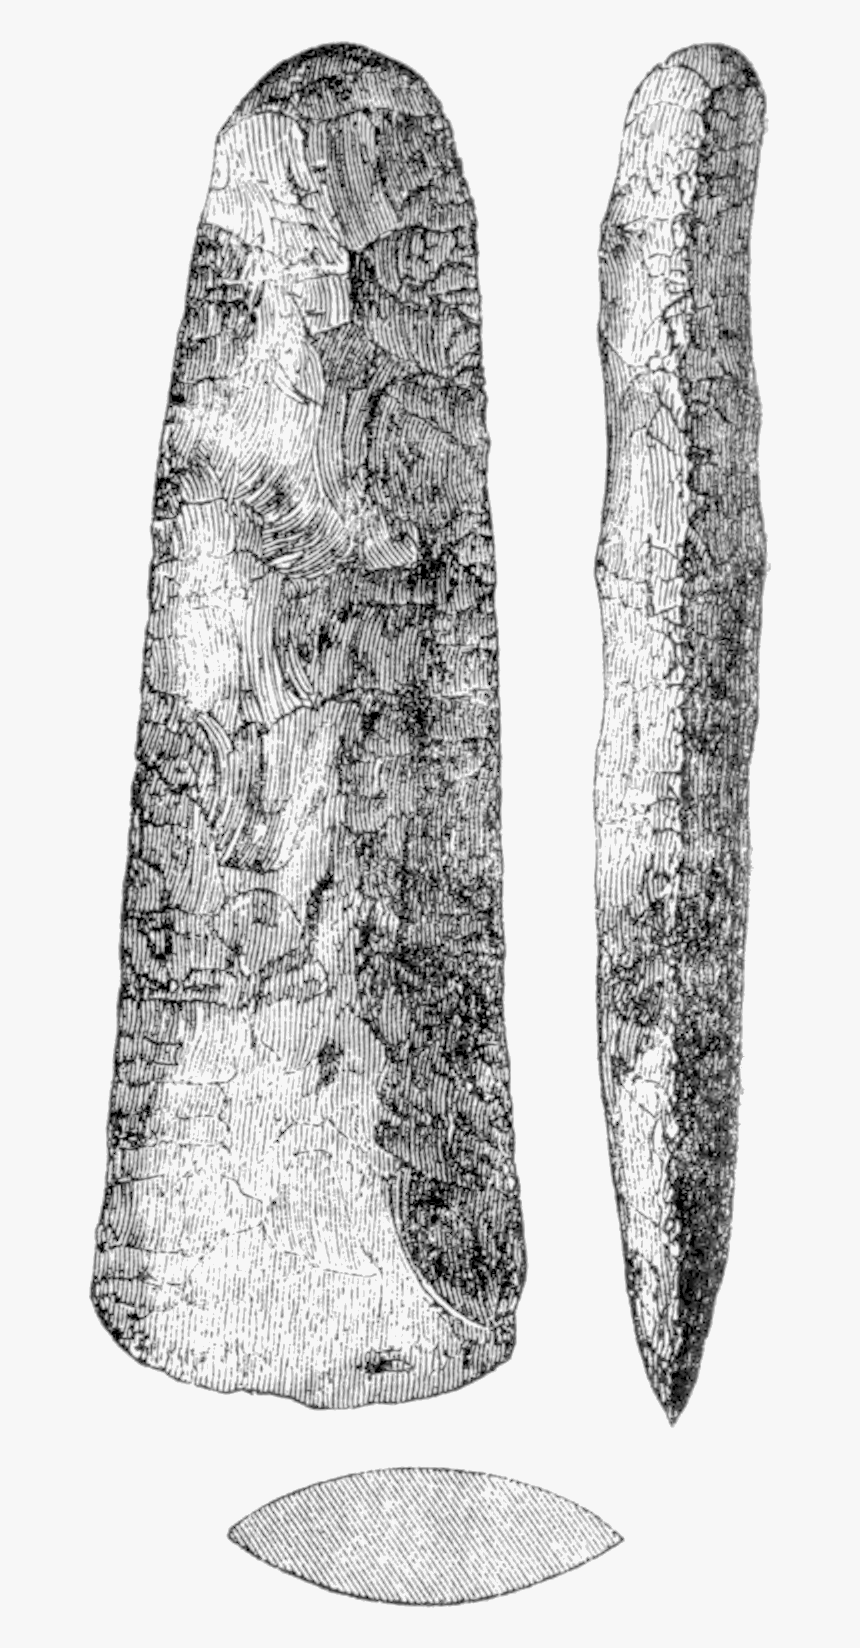 The Ancient Stone Implements 0113 - Swamp Birch, HD Png Download, Free Download